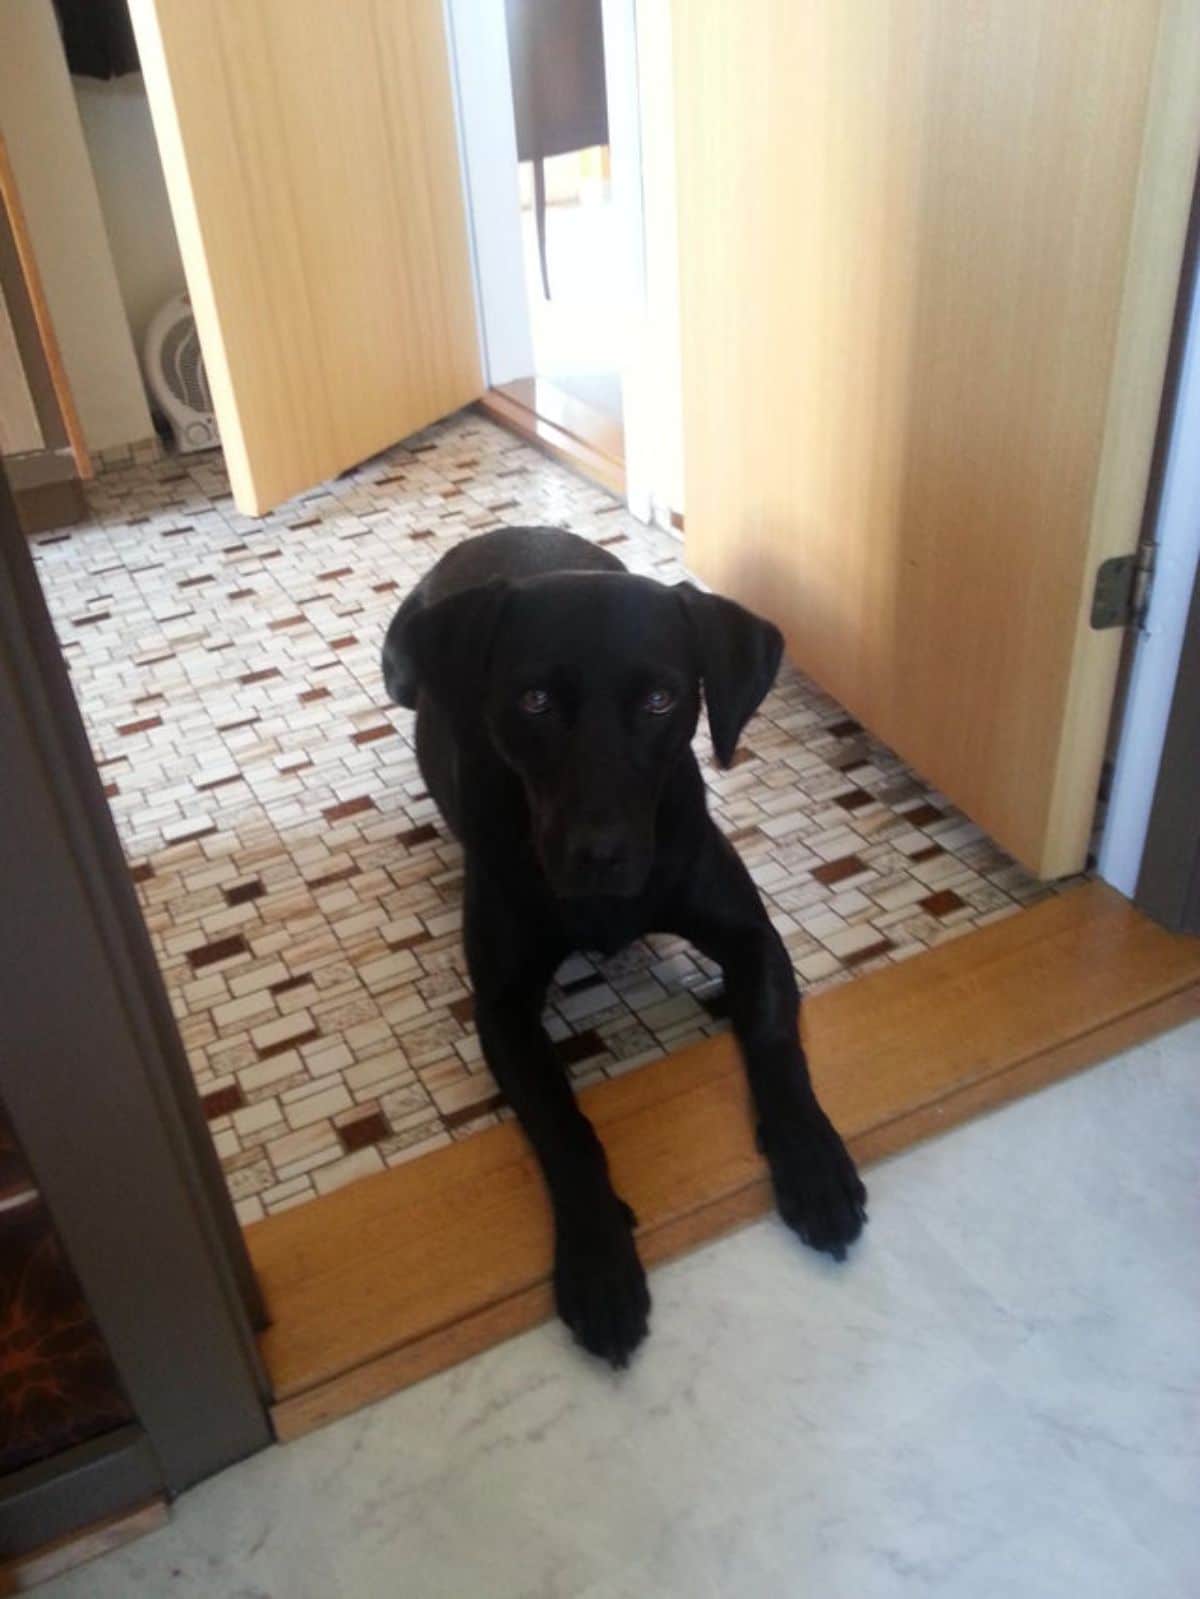 black dog lying down on a tiled floor with paws on the white tiles of the next room